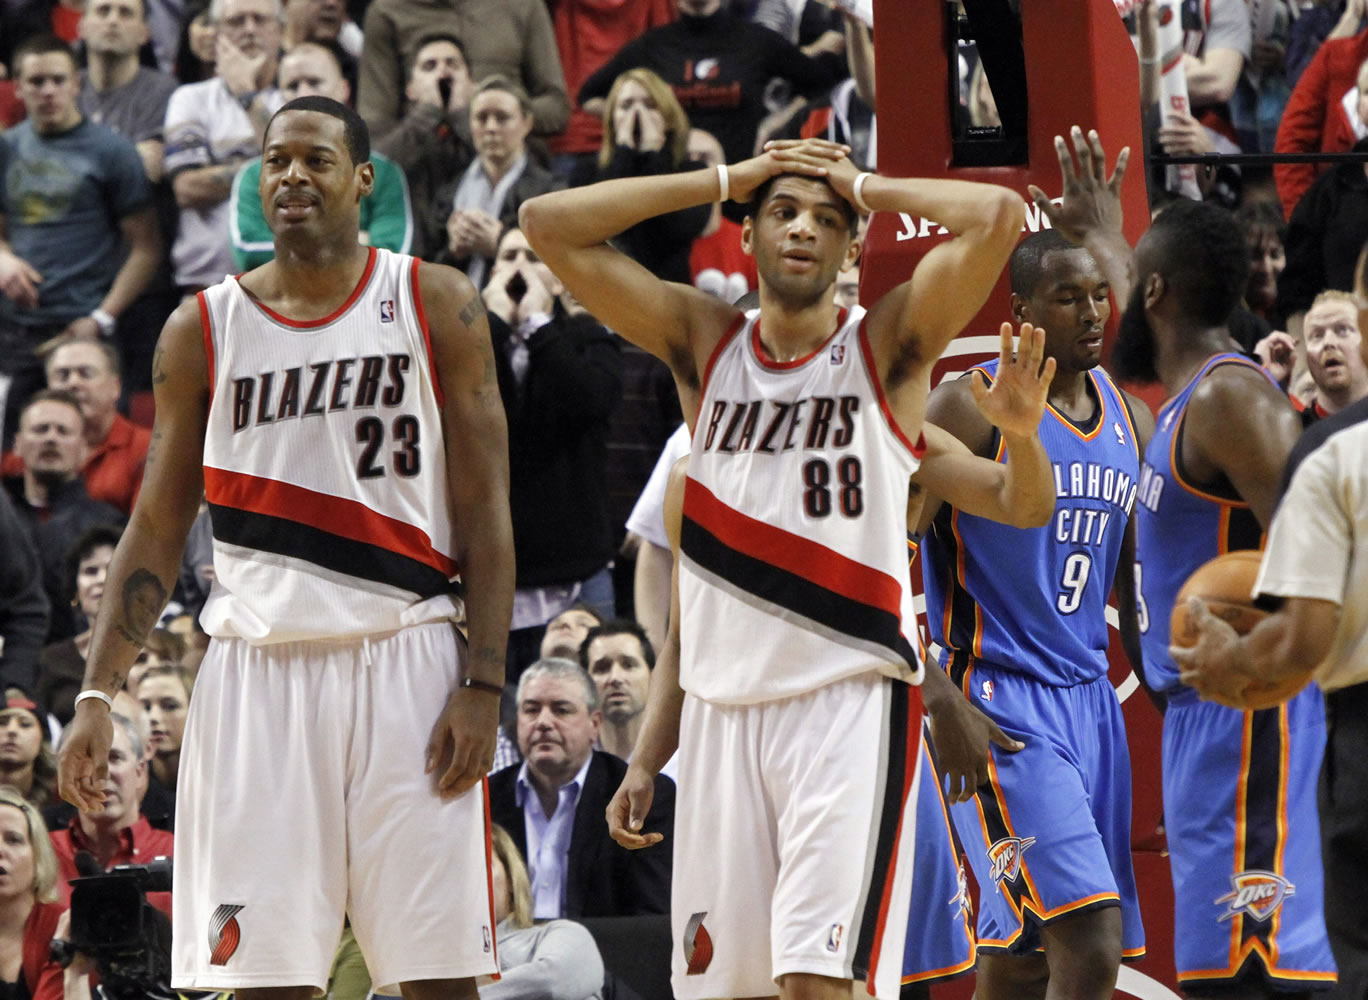 Marcus Camby (23) and Nicolas Batum (88), walk away after the Blazers were called for goaltending in overtime during their game against the Oklahoma City Thunder on Feb. 6.